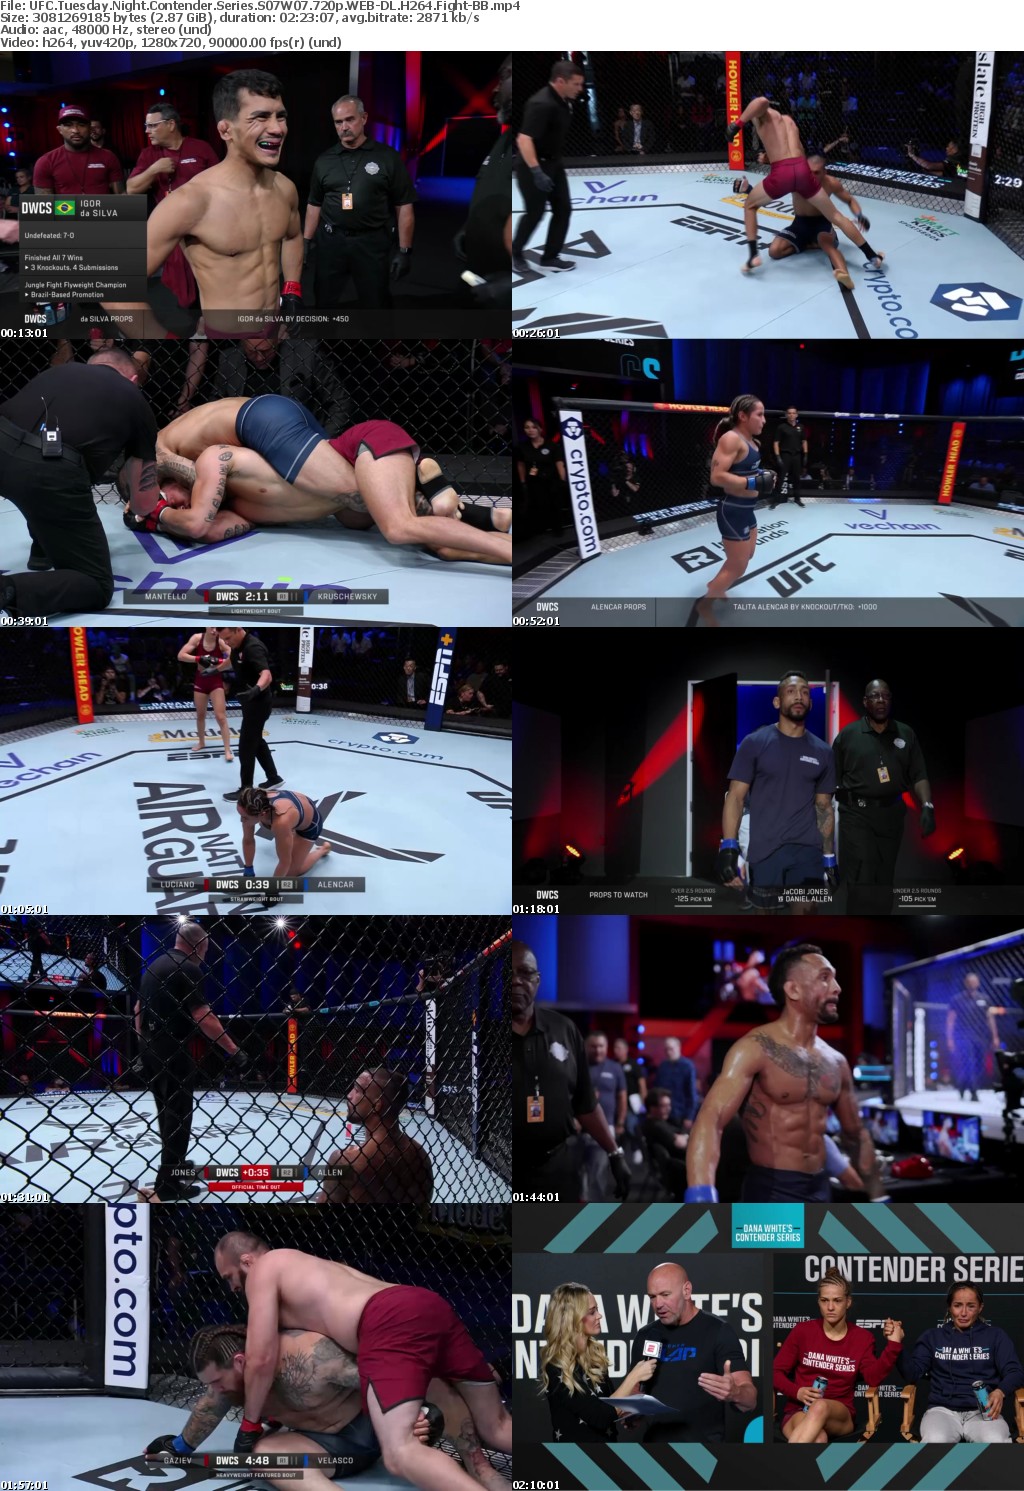 UFC Tuesday Night Contender Series S07W07 720p WEB-DL H264 Fight-BB